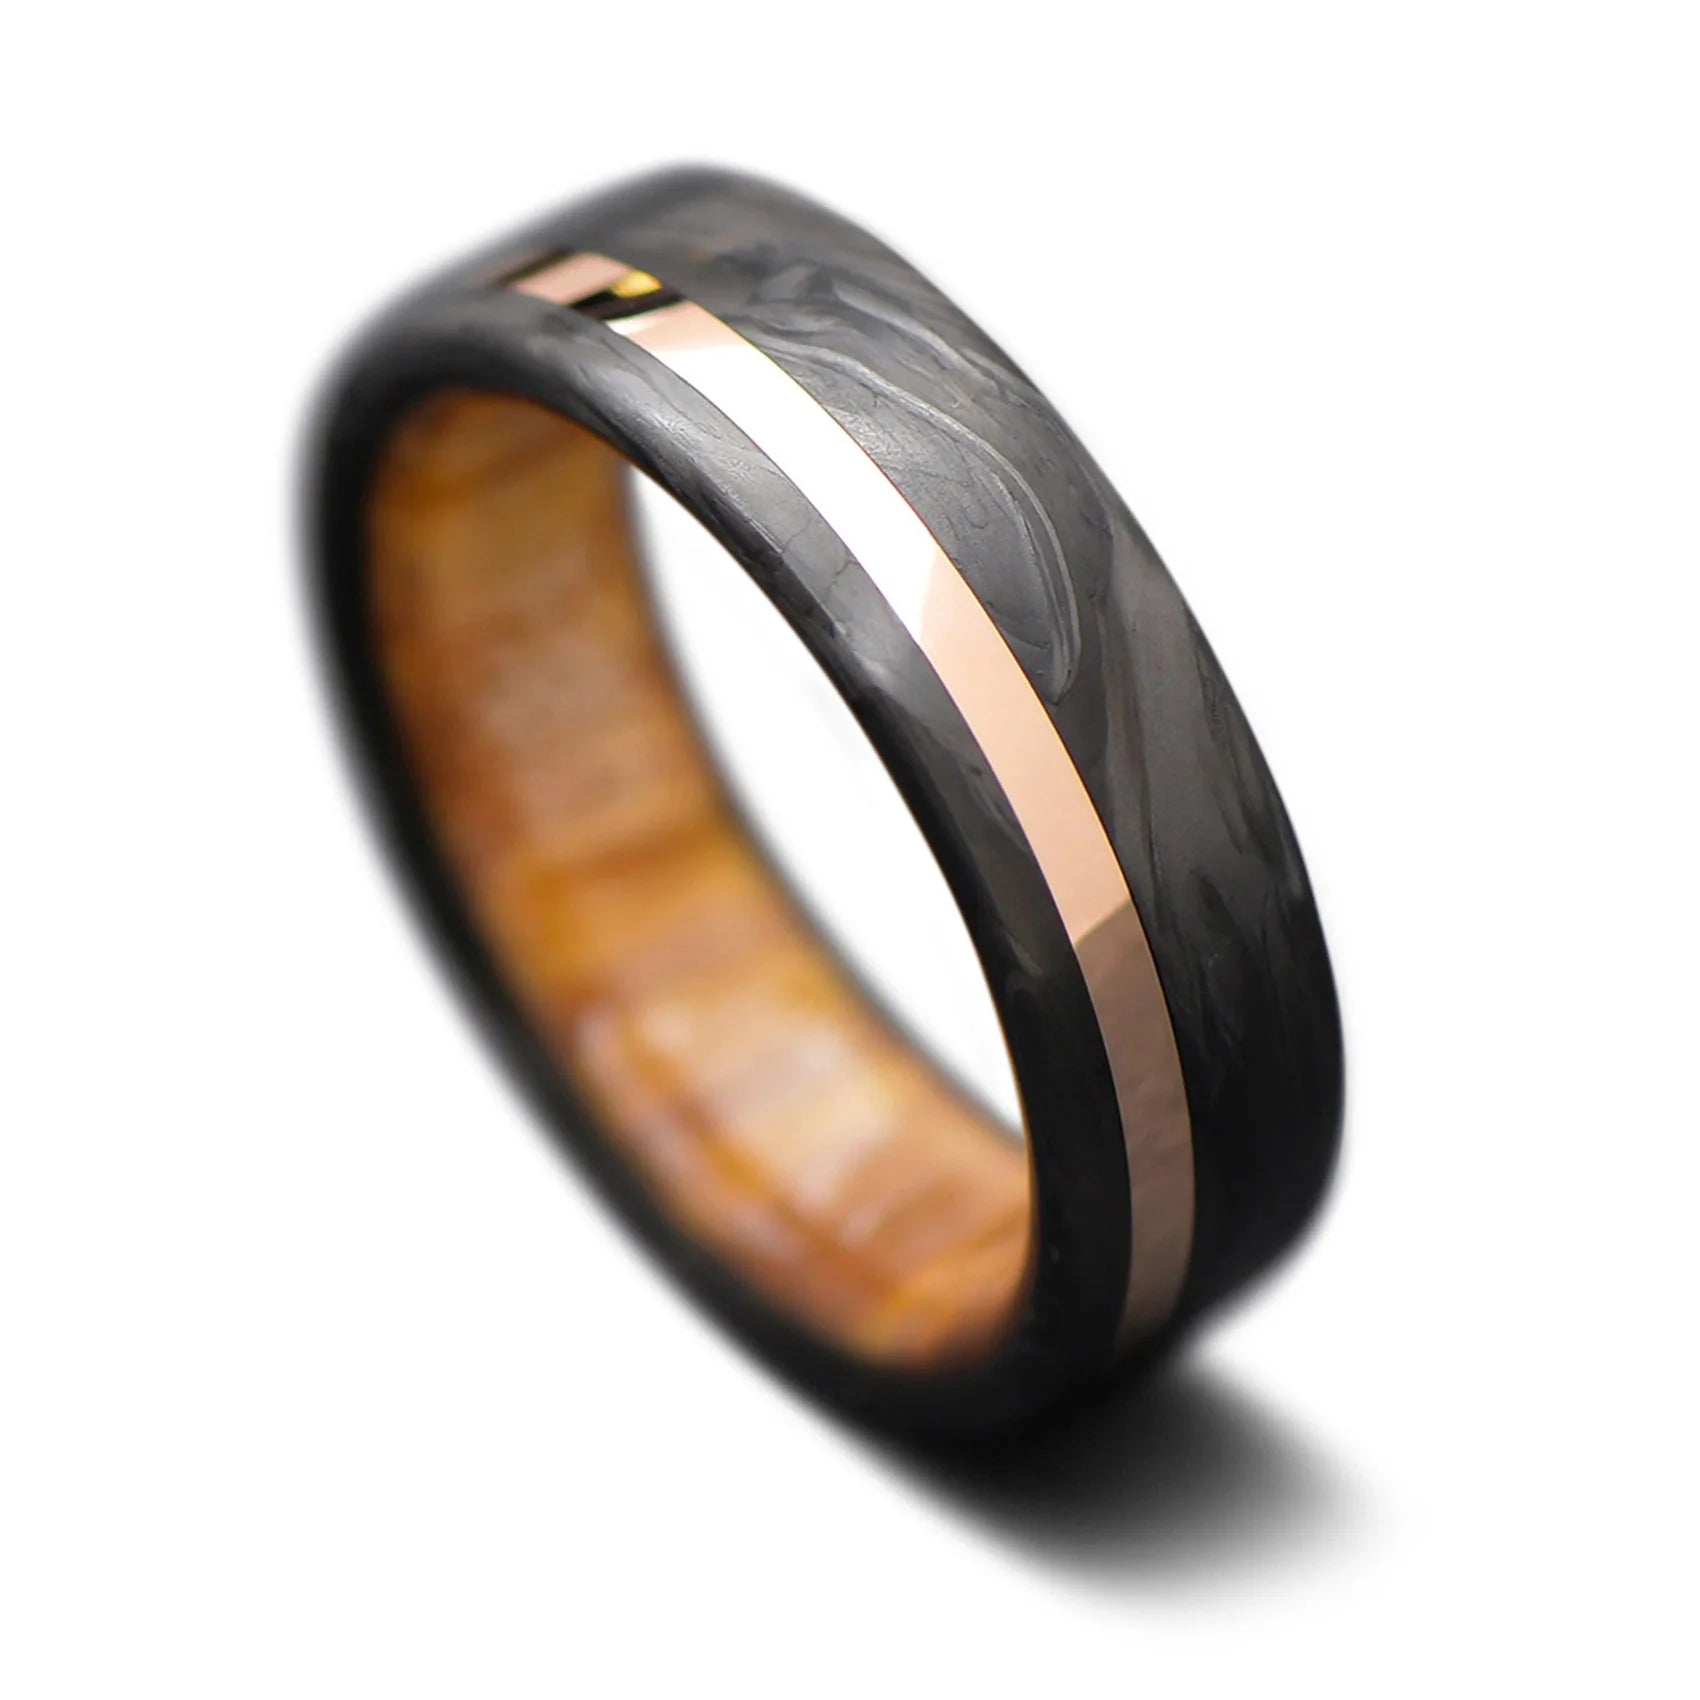 Carbon fiber wedding ring with rose gold inlay and Silver Spalted Birch inner sleeve, 6mm -THE HORIZON